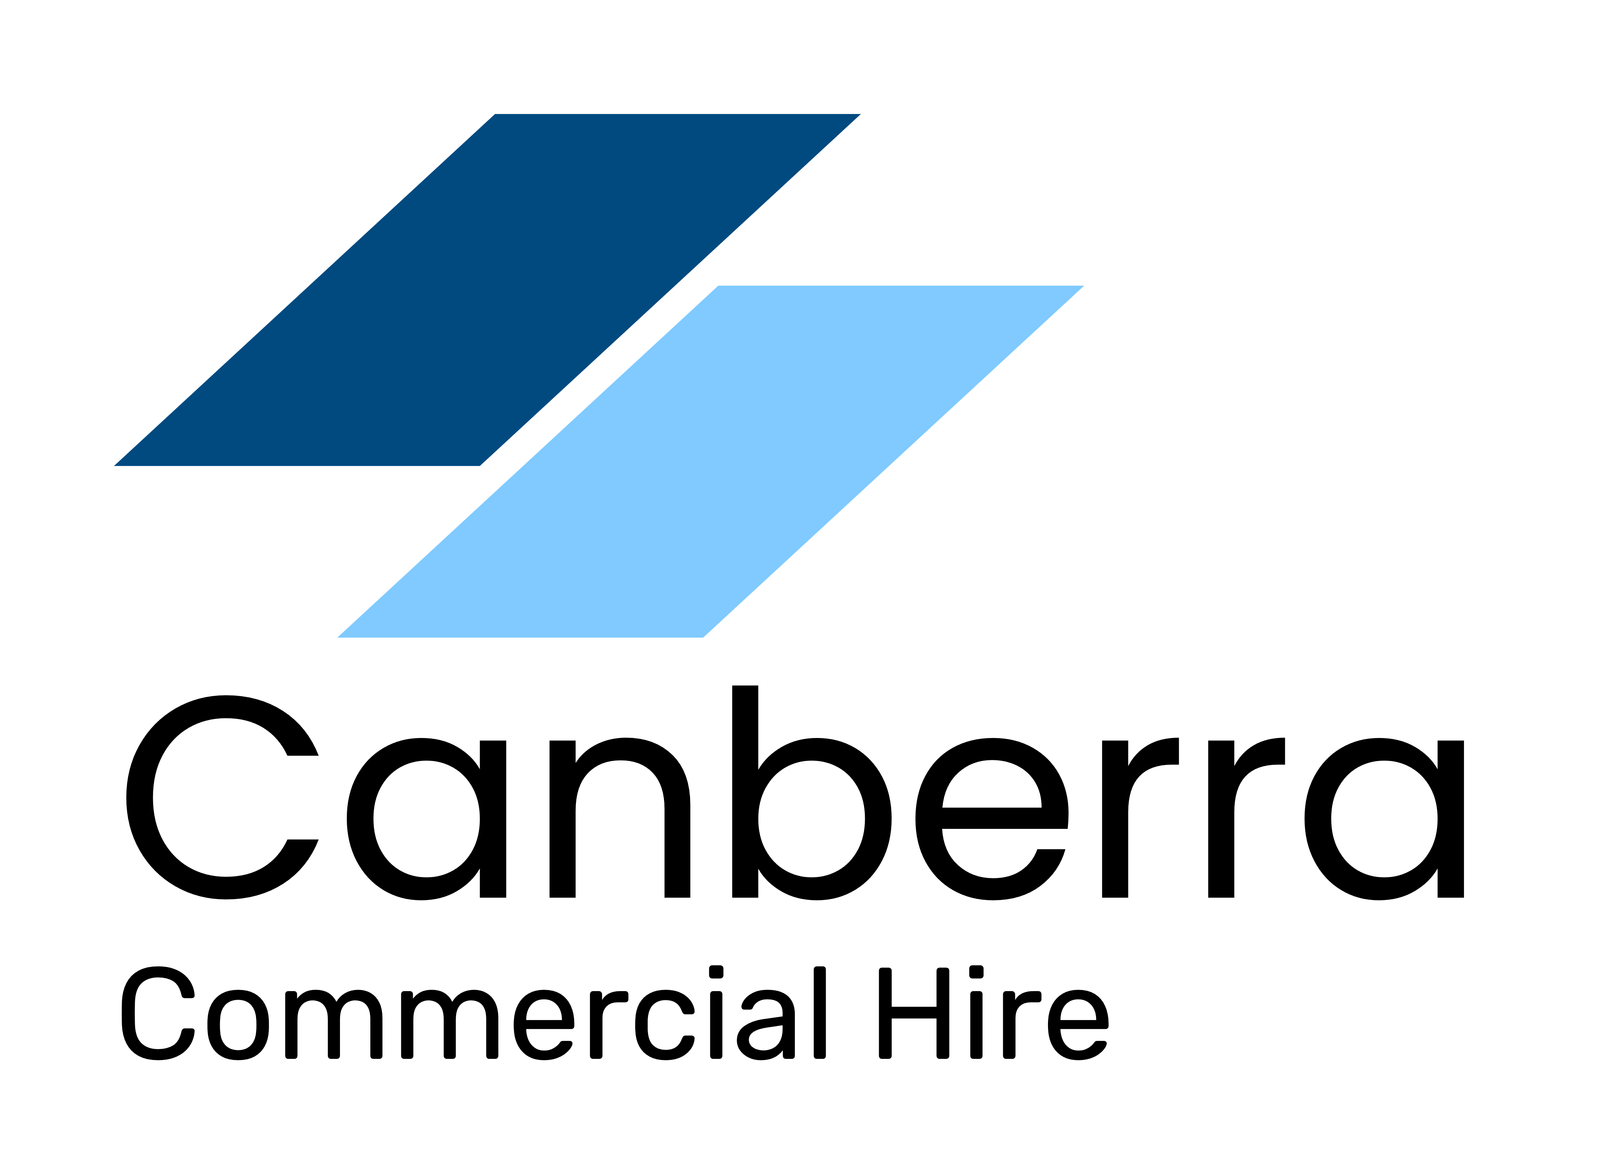 Canberra Commercial Hire